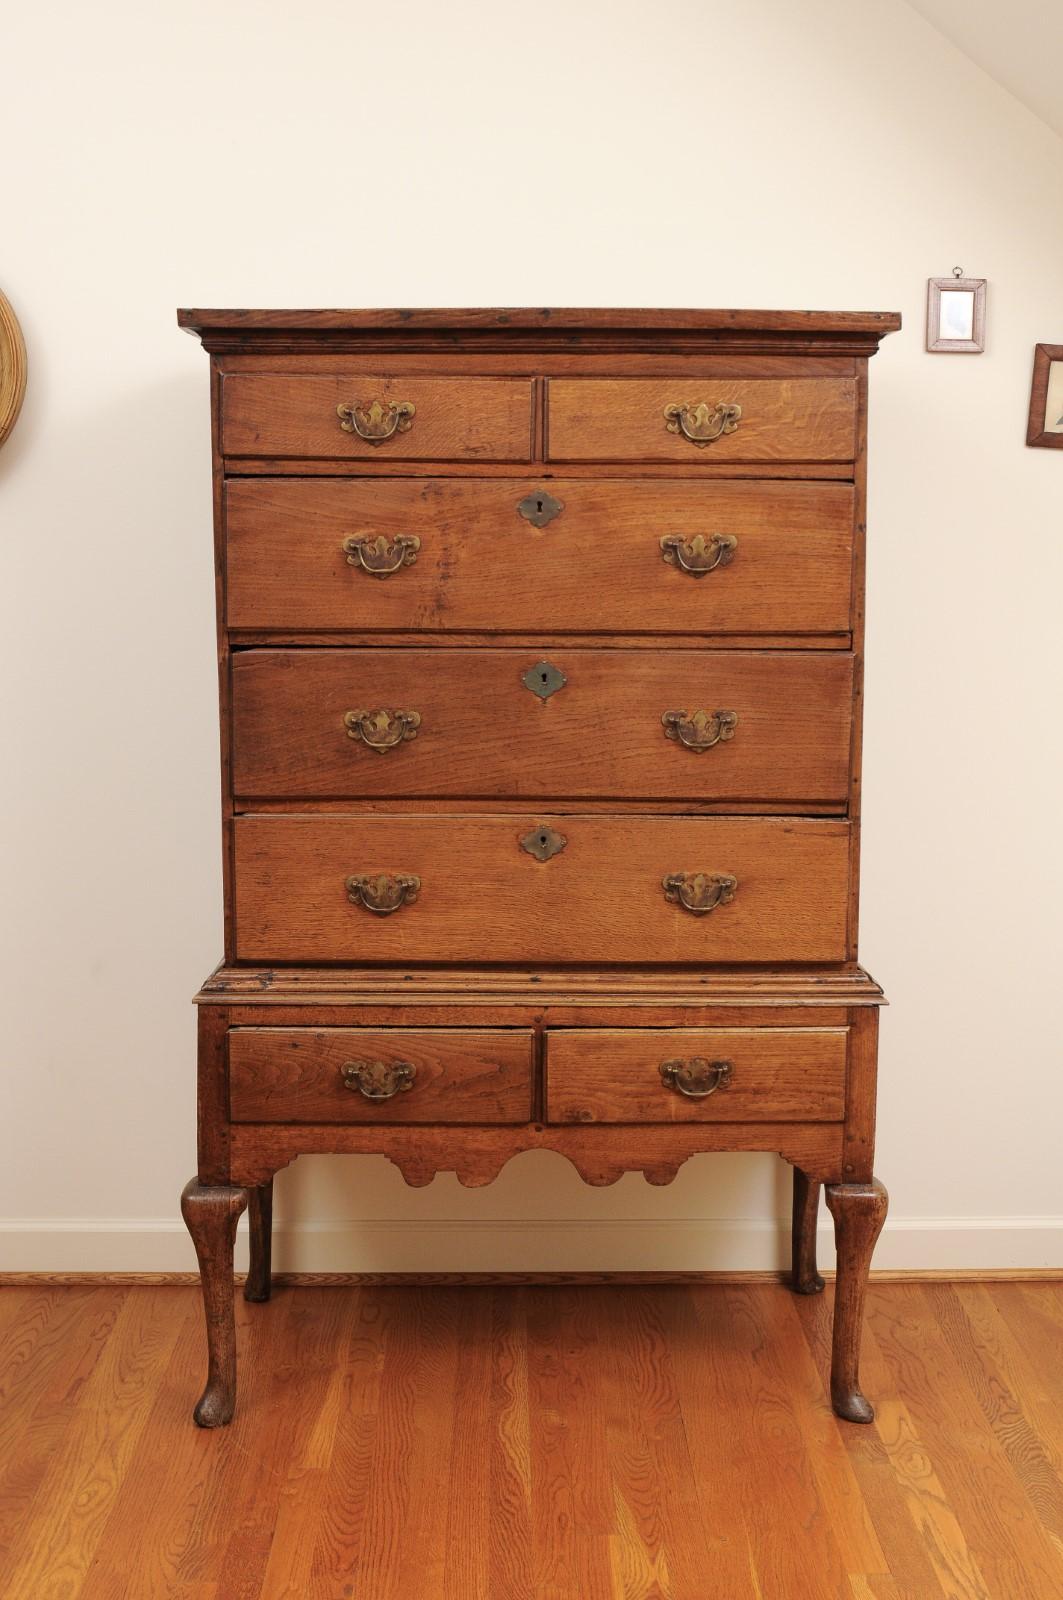 An English Georgian period oak highboy from the early 19th century, with seven drawers and cabriole legs. Created in England during the first quarter of the 19th century, this handsome highboy features a simple cornice overhanging a perfectly